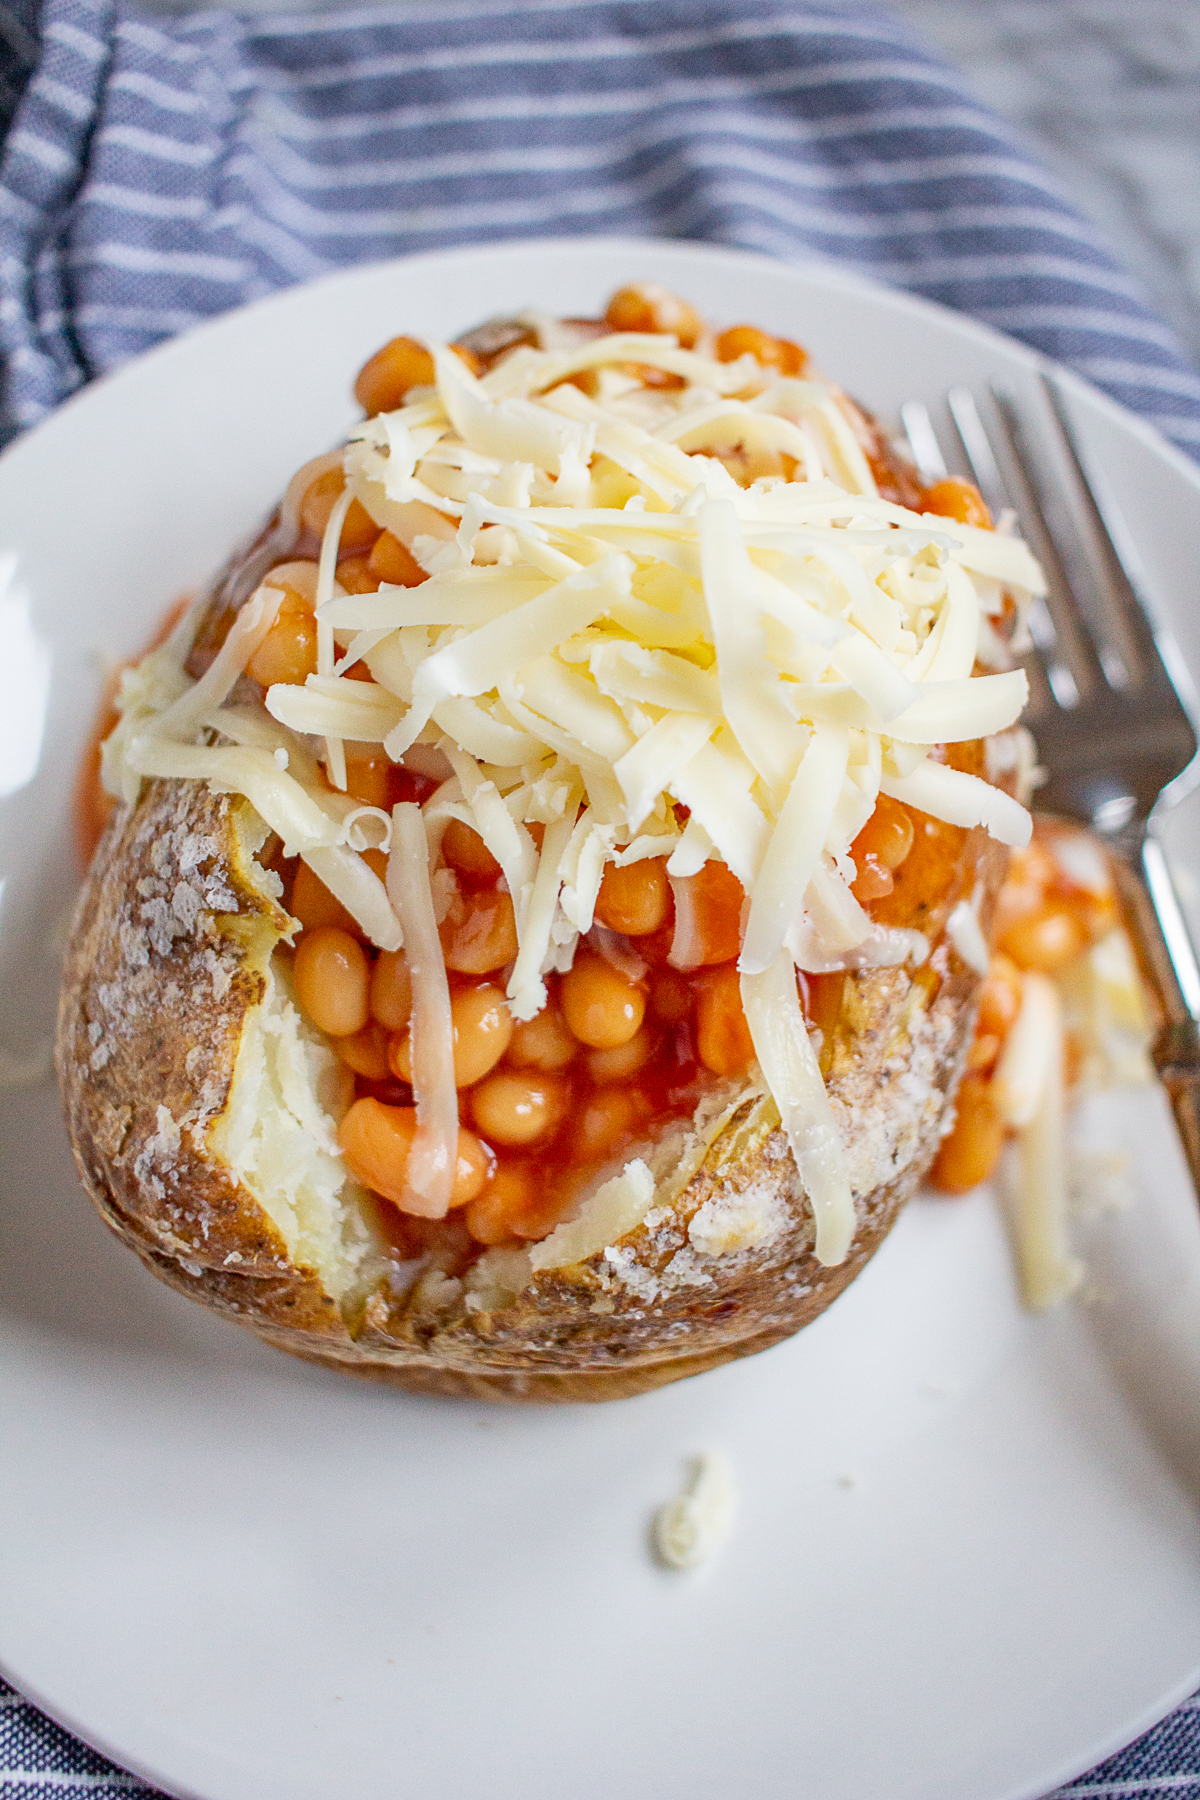 Jacket Potatoes with Beans | How to Make Jacket Potatoes with Beans